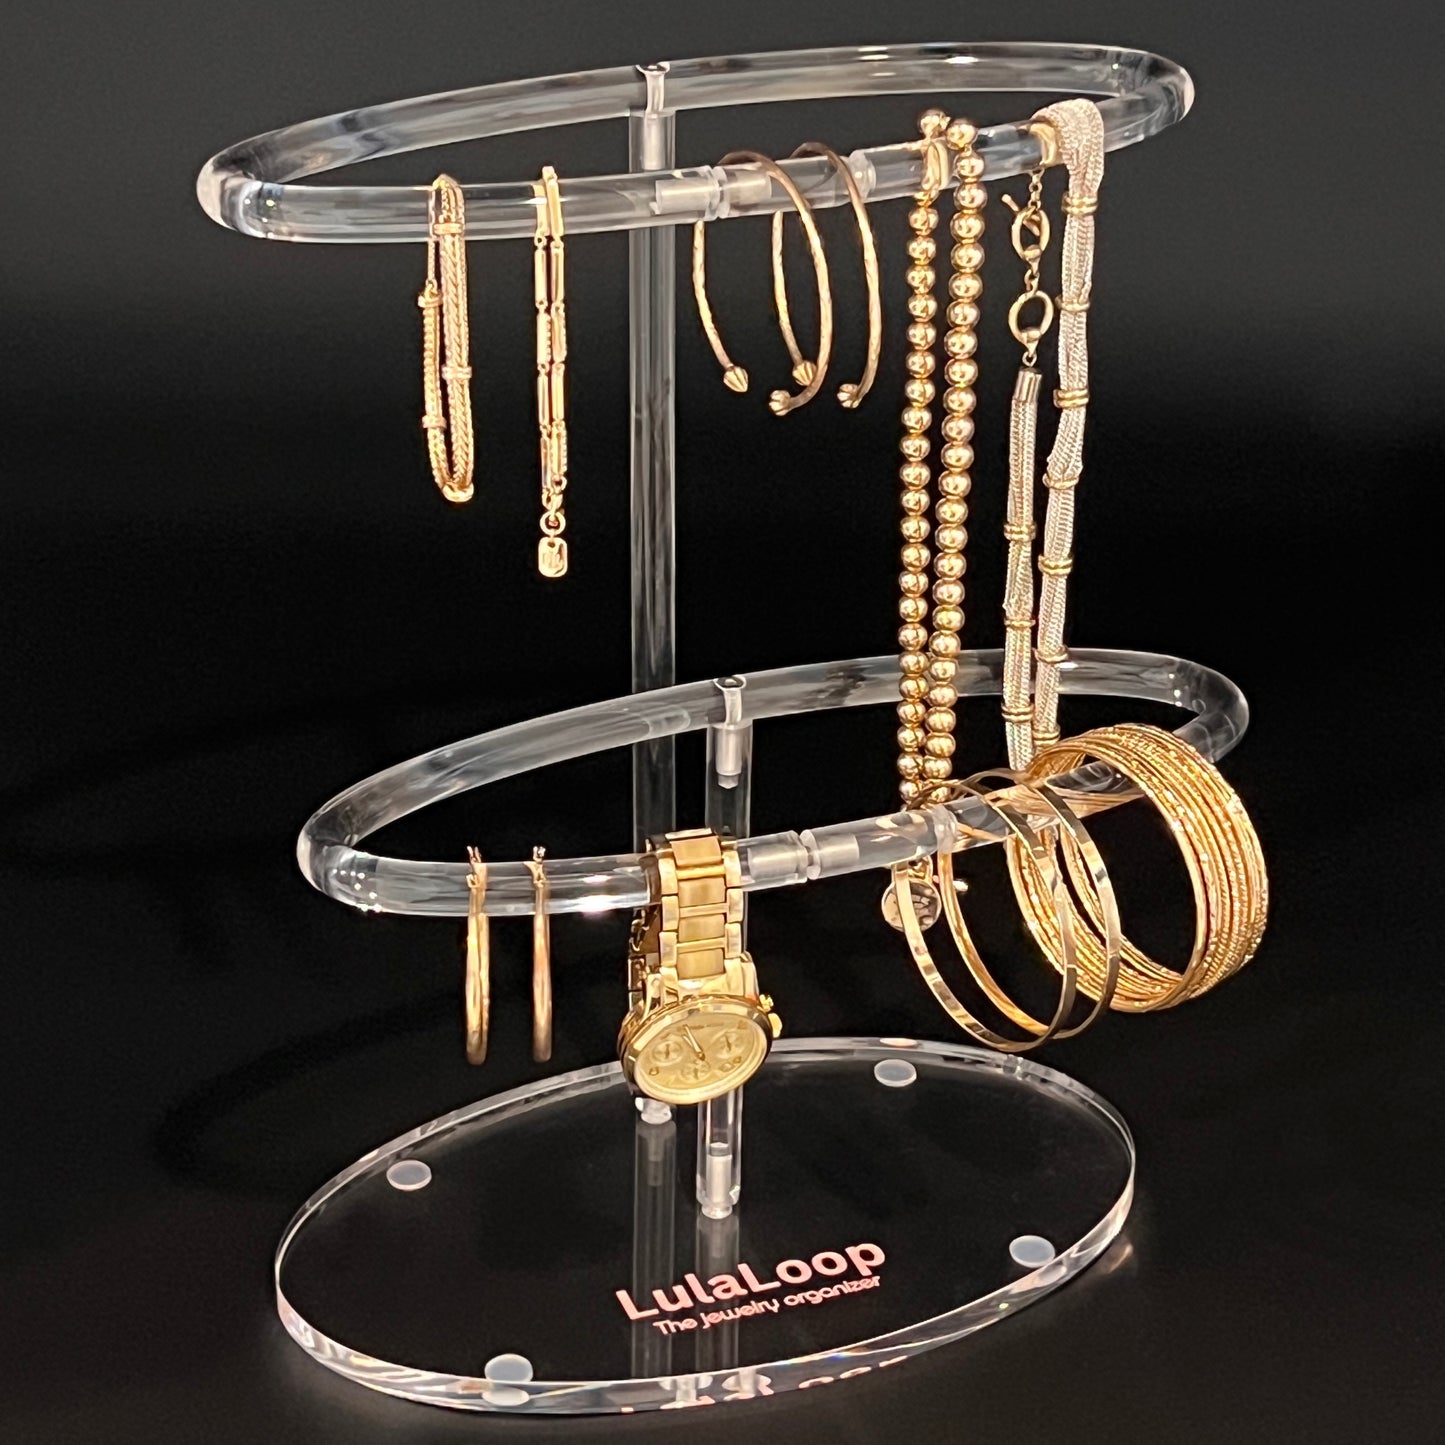 LulaLoop - The jewelry organizer 25% Off Sale